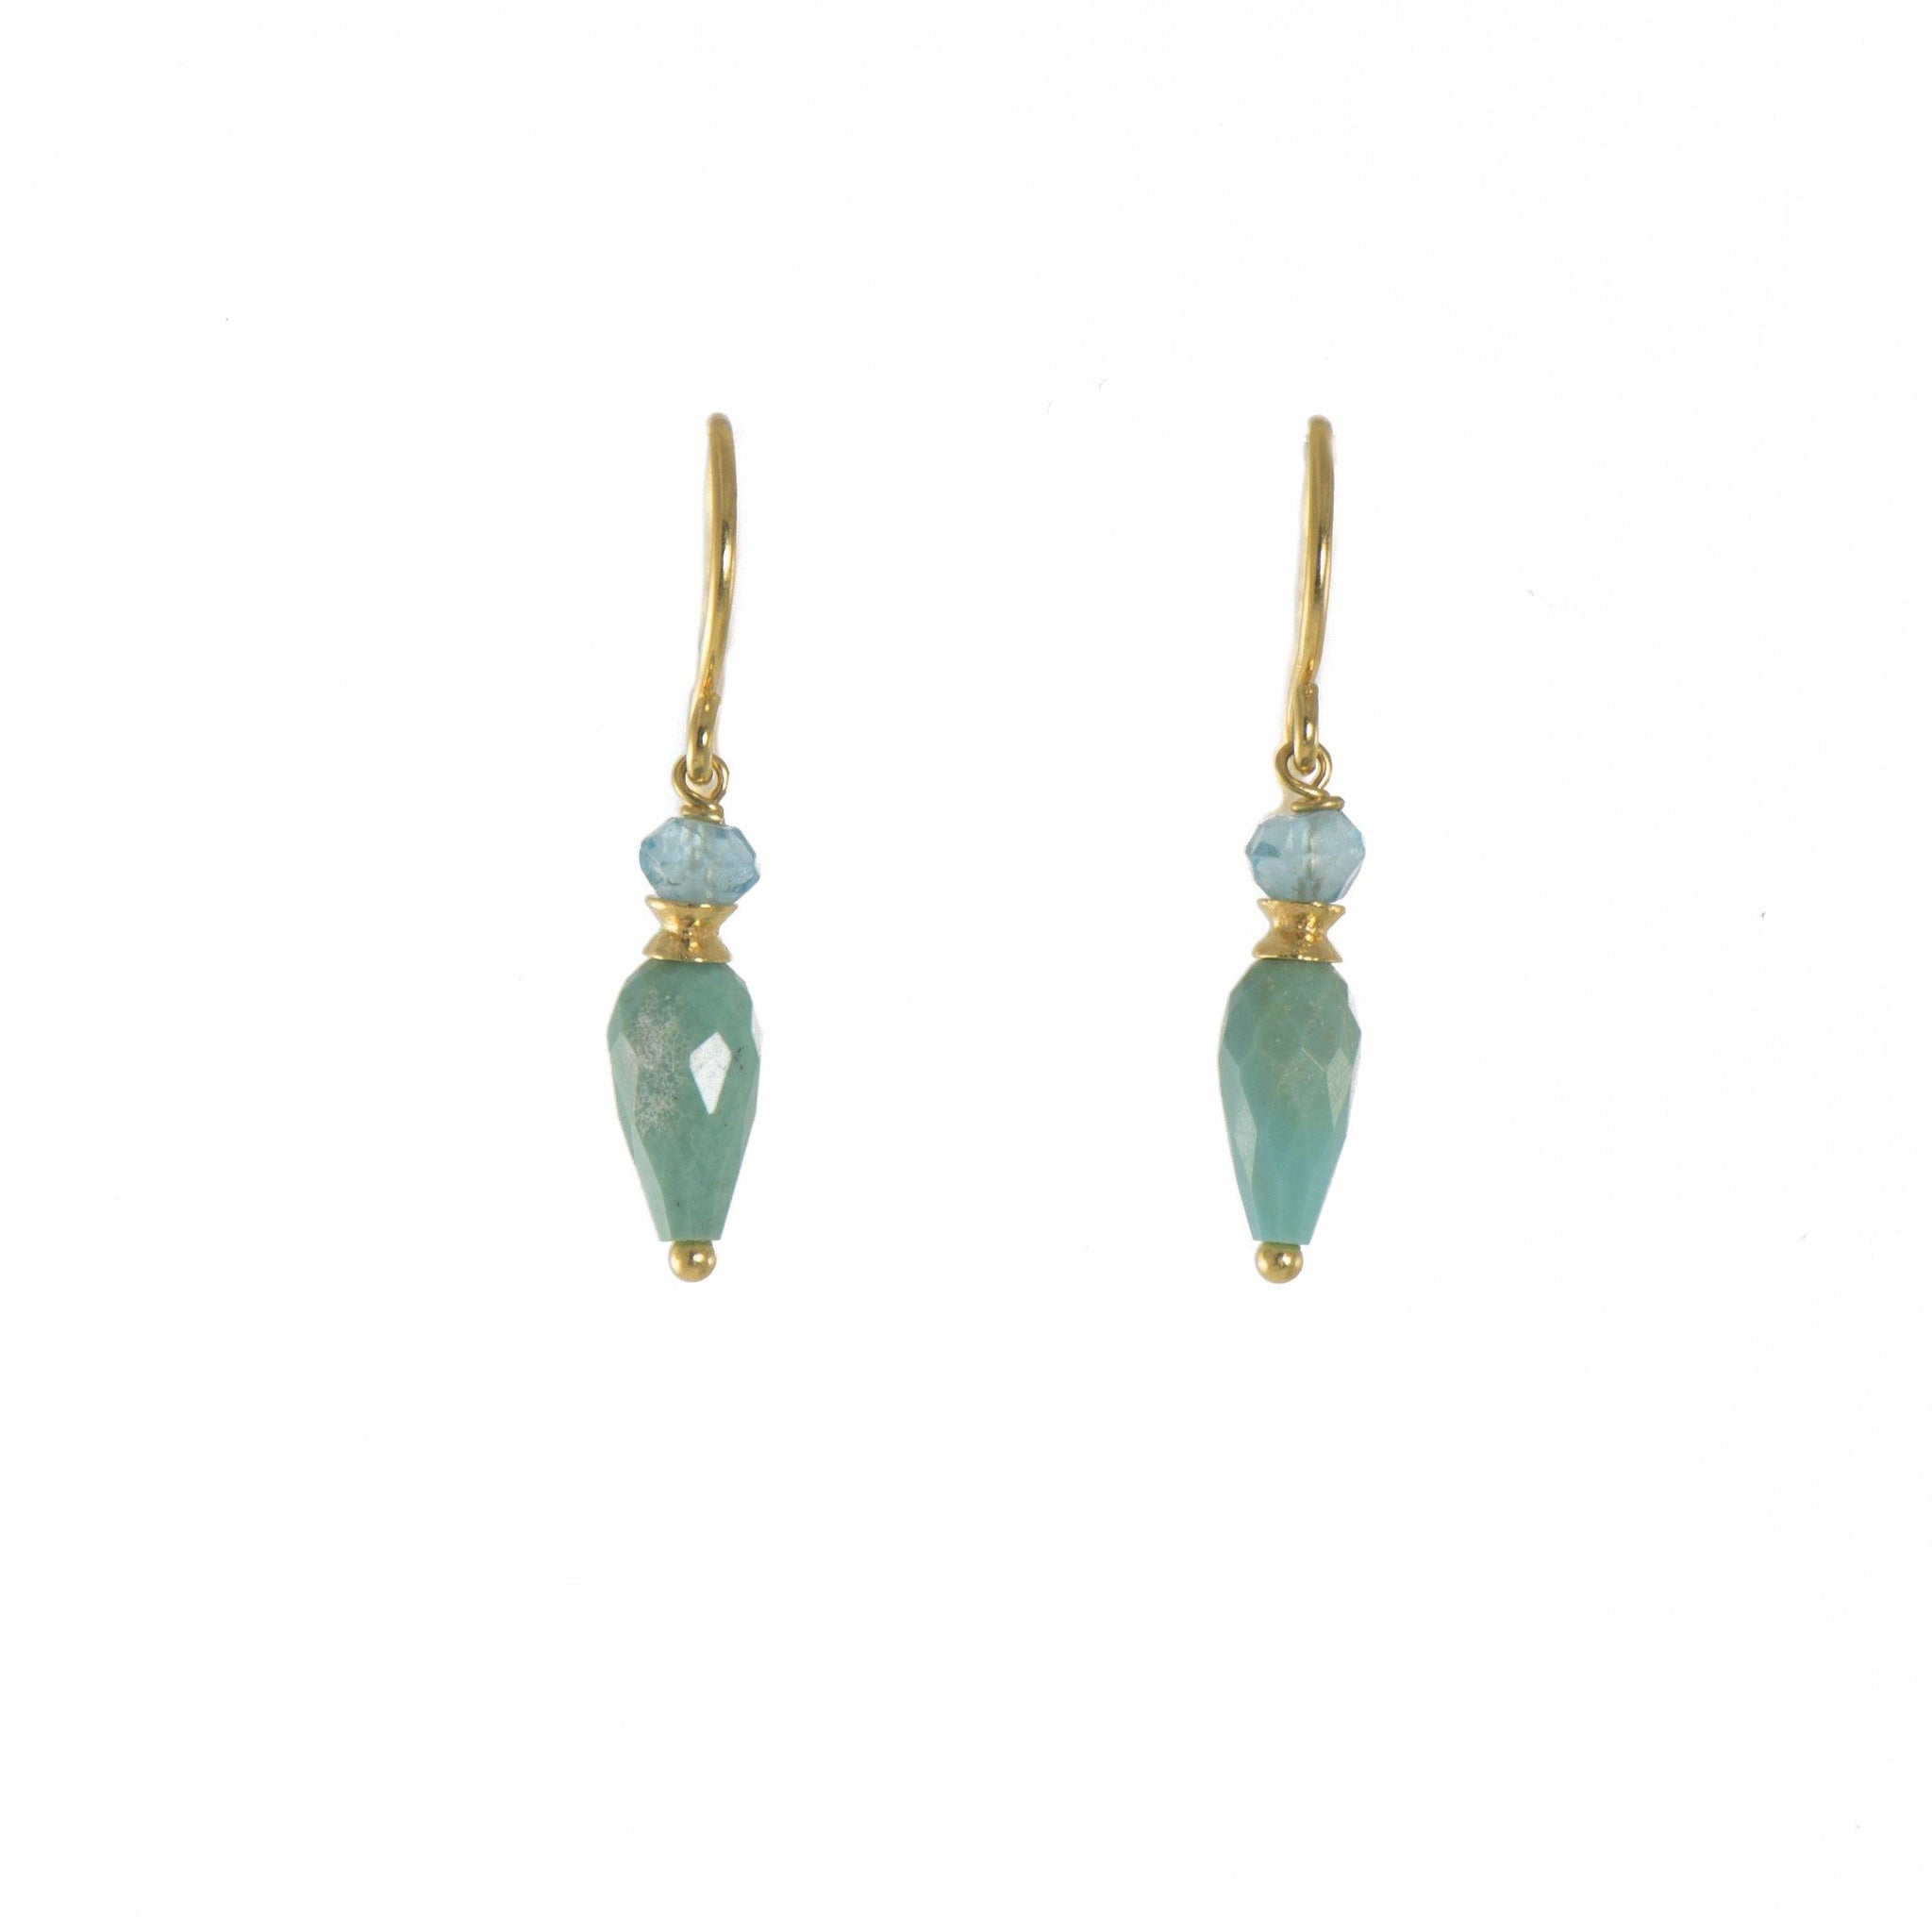 FACETED APATITE AND TURQUOISE FRENCH WIRE EARRINGS FAIR TRADE 24K GOLD VERMEIL - Joyla Jewelry